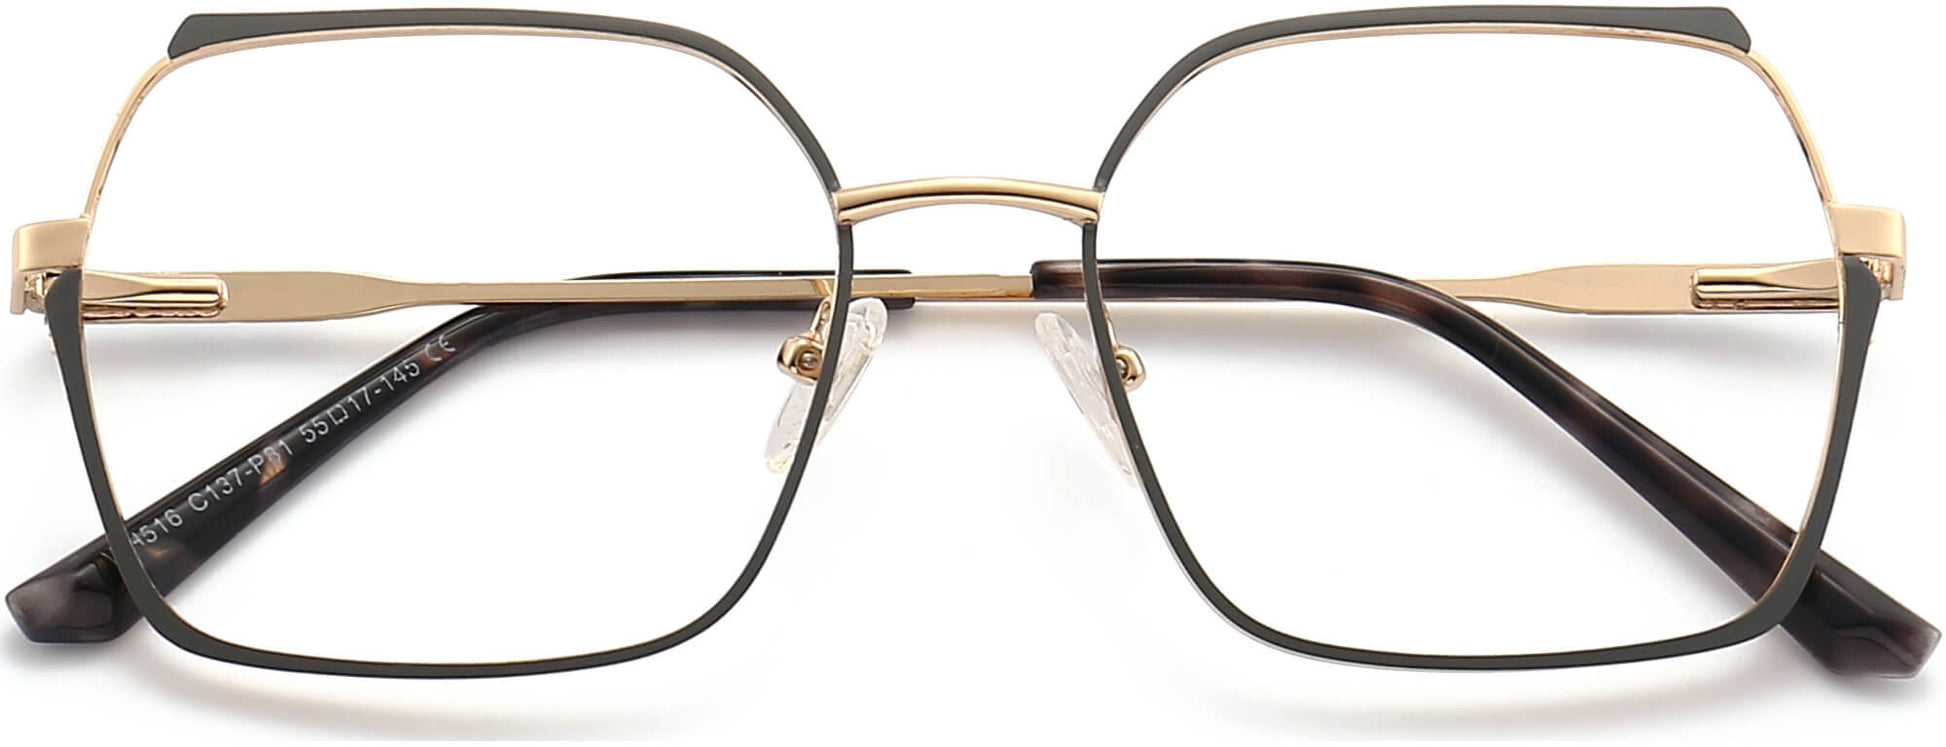 Forrest Square Gray Eyeglasses from ANRRI, closed view